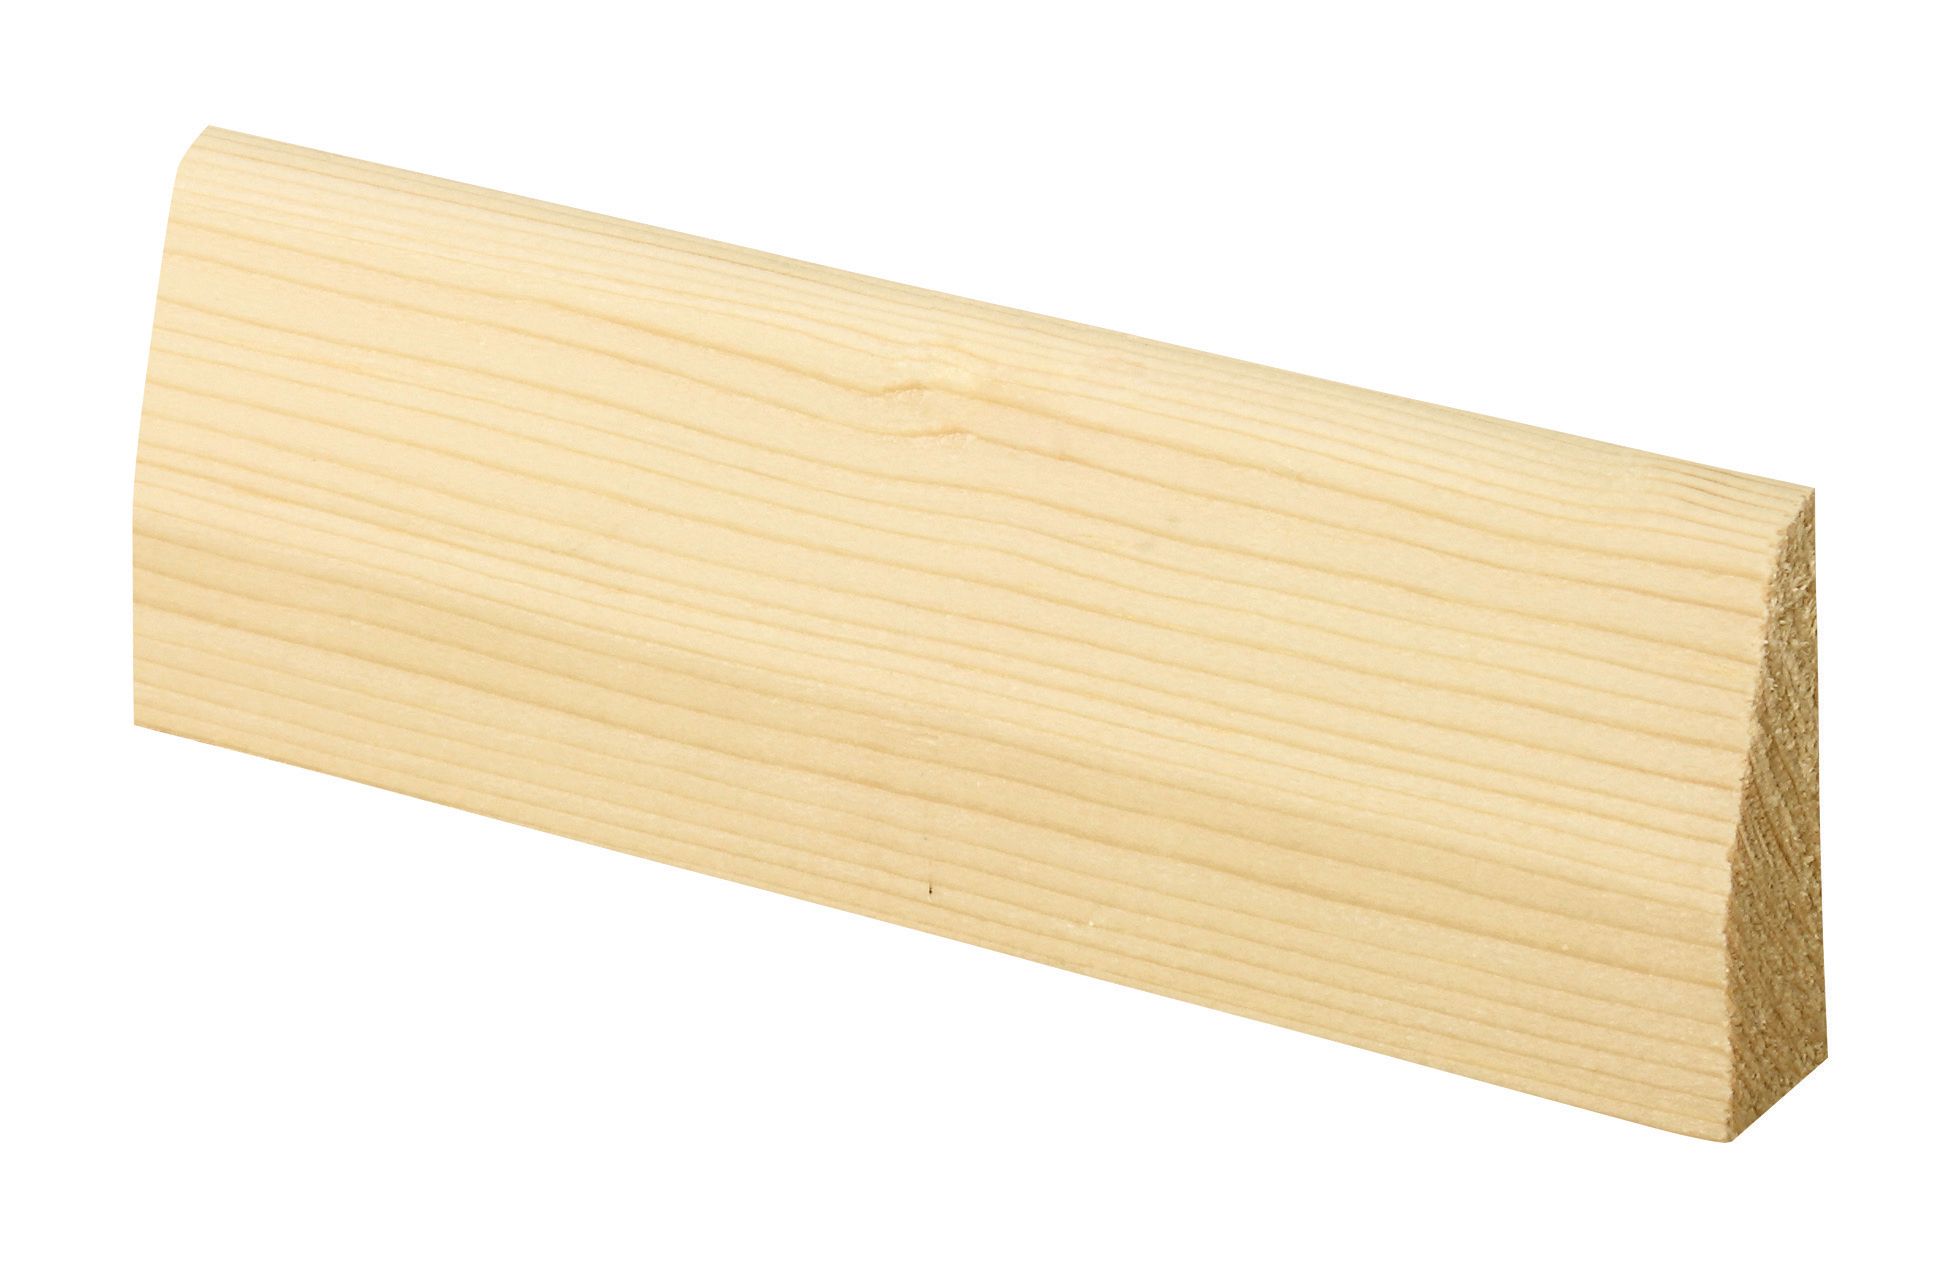 Image of Wickes Chamfered Pine Architrave - 15mm x 45mm x 2100 mm